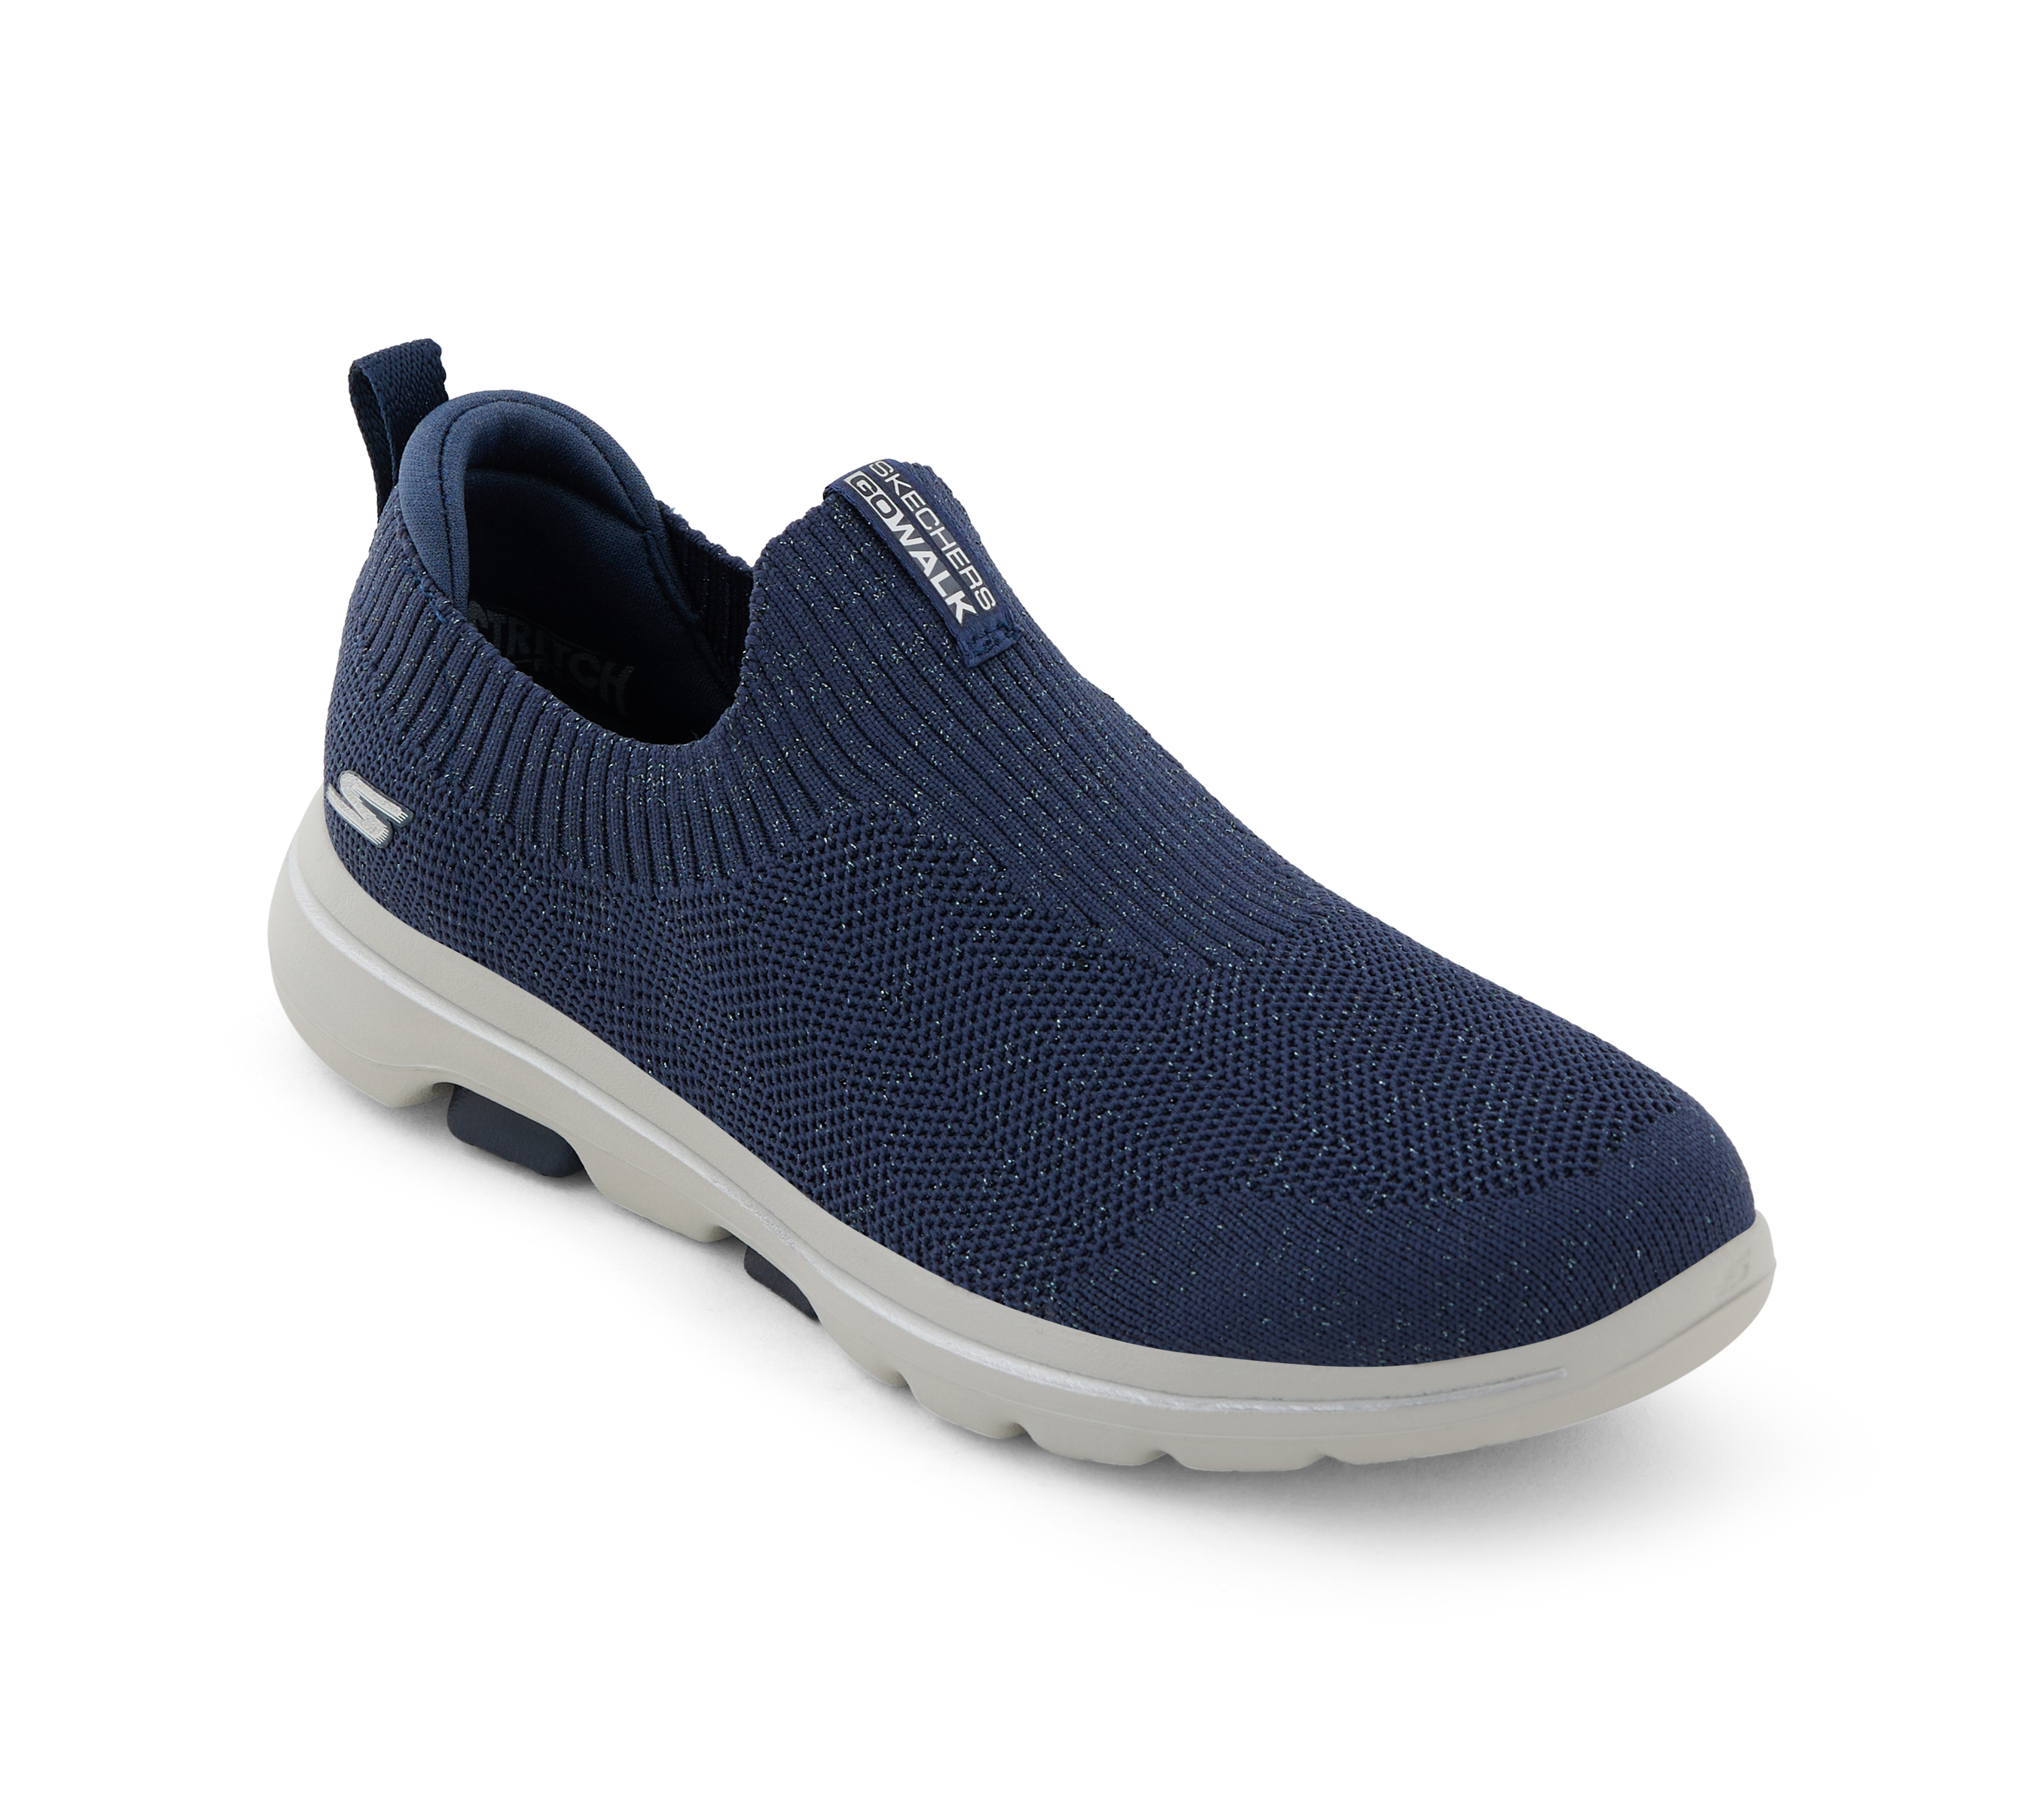 Skechers shoes - Buy Skechers shoes Online in India | Myntra-saigonsouth.com.vn